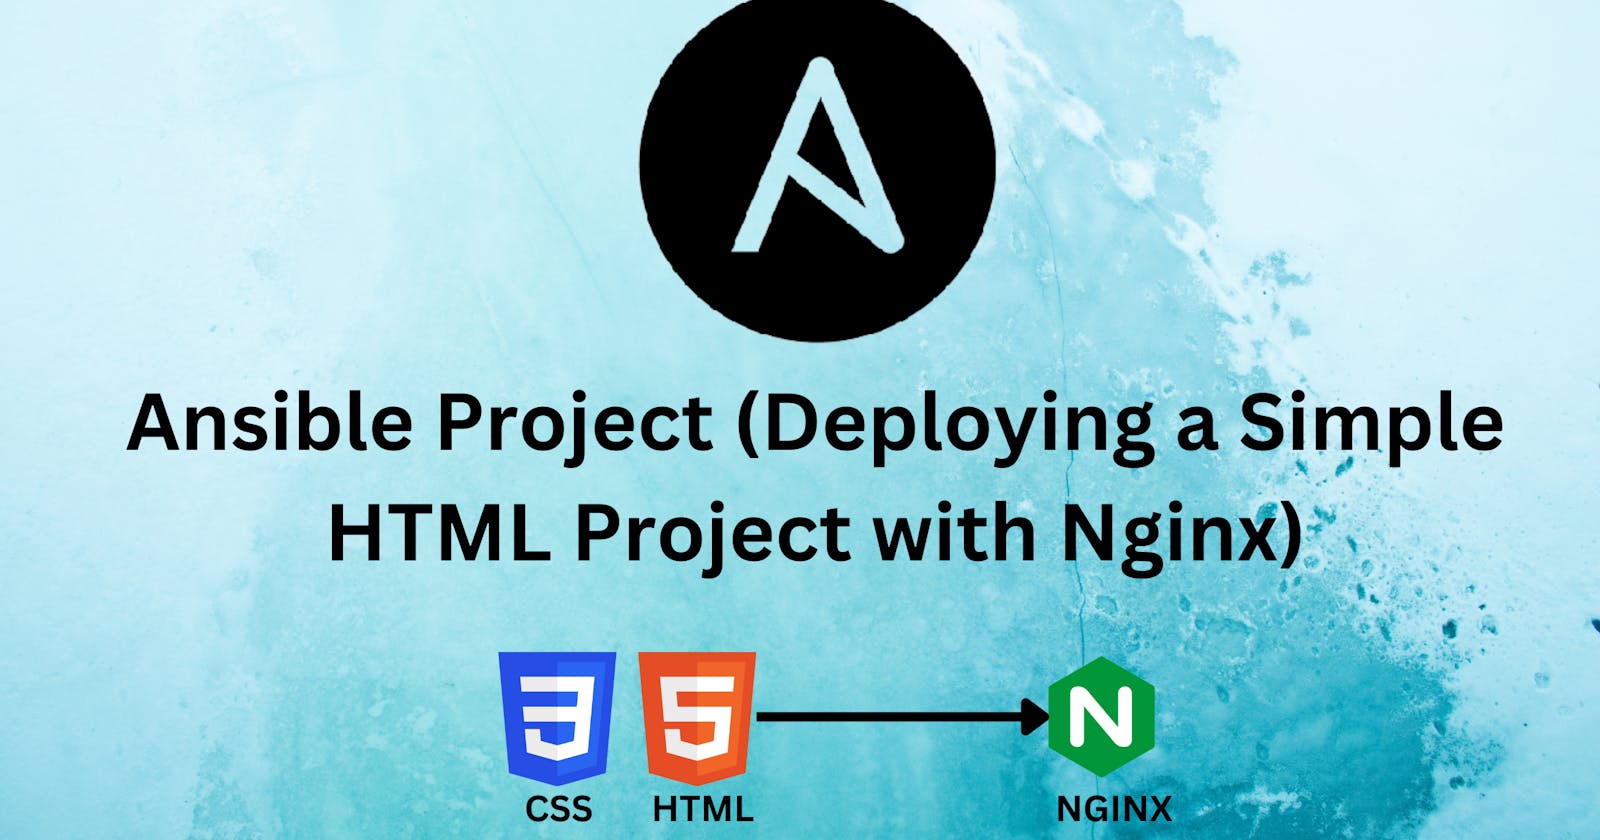 Ansible Project (Deploying a Simple HTML Project with Nginx)